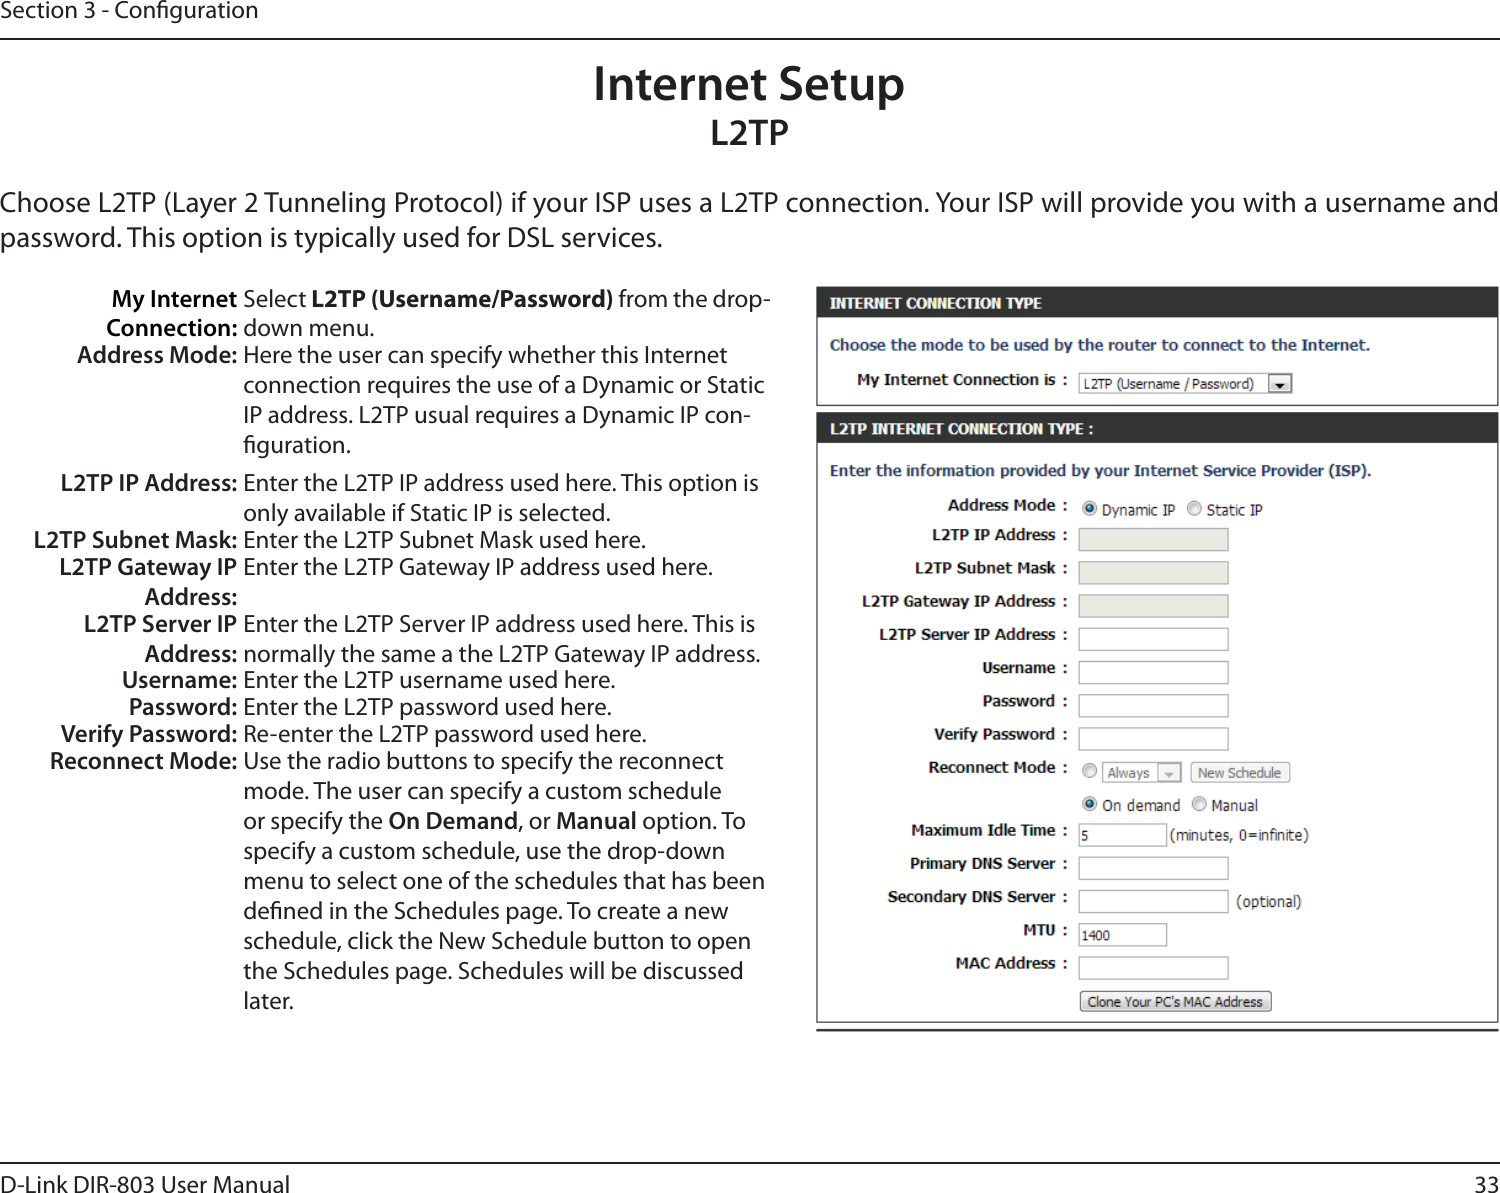 33D-Link DIR-803 User ManualSection 3 - CongurationInternet SetupL2TPChoose L2TP (Layer 2 Tunneling Protocol) if your ISP uses a L2TP connection. Your ISP will provide you with a username and password. This option is typically used for DSL services. My Internet Connection:Select L2TP (Username/Password) from the drop-down menu.Address Mode: Here the user can specify whether this Internet connection requires the use of a Dynamic or Static IP address. L2TP usual requires a Dynamic IP con-guration.L2TP IP Address: Enter the L2TP IP address used here. This option is only available if Static IP is selected.L2TP Subnet Mask: Enter the L2TP Subnet Mask used here.L2TP Gateway IP Address:Enter the L2TP Gateway IP address used here.L2TP Server IP Address:Enter the L2TP Server IP address used here. This is normally the same a the L2TP Gateway IP address.Username: Enter the L2TP username used here.Password: Enter the L2TP password used here.Verify Password: Re-enter the L2TP password used here.Reconnect Mode: Use the radio buttons to specify the reconnect mode. The user can specify a custom schedule or specify the On Demand, or Manual option. To specify a custom schedule, use the drop-down menu to select one of the schedules that has been dened in the Schedules page. To create a new schedule, click the New Schedule button to open the Schedules page. Schedules will be discussed later.